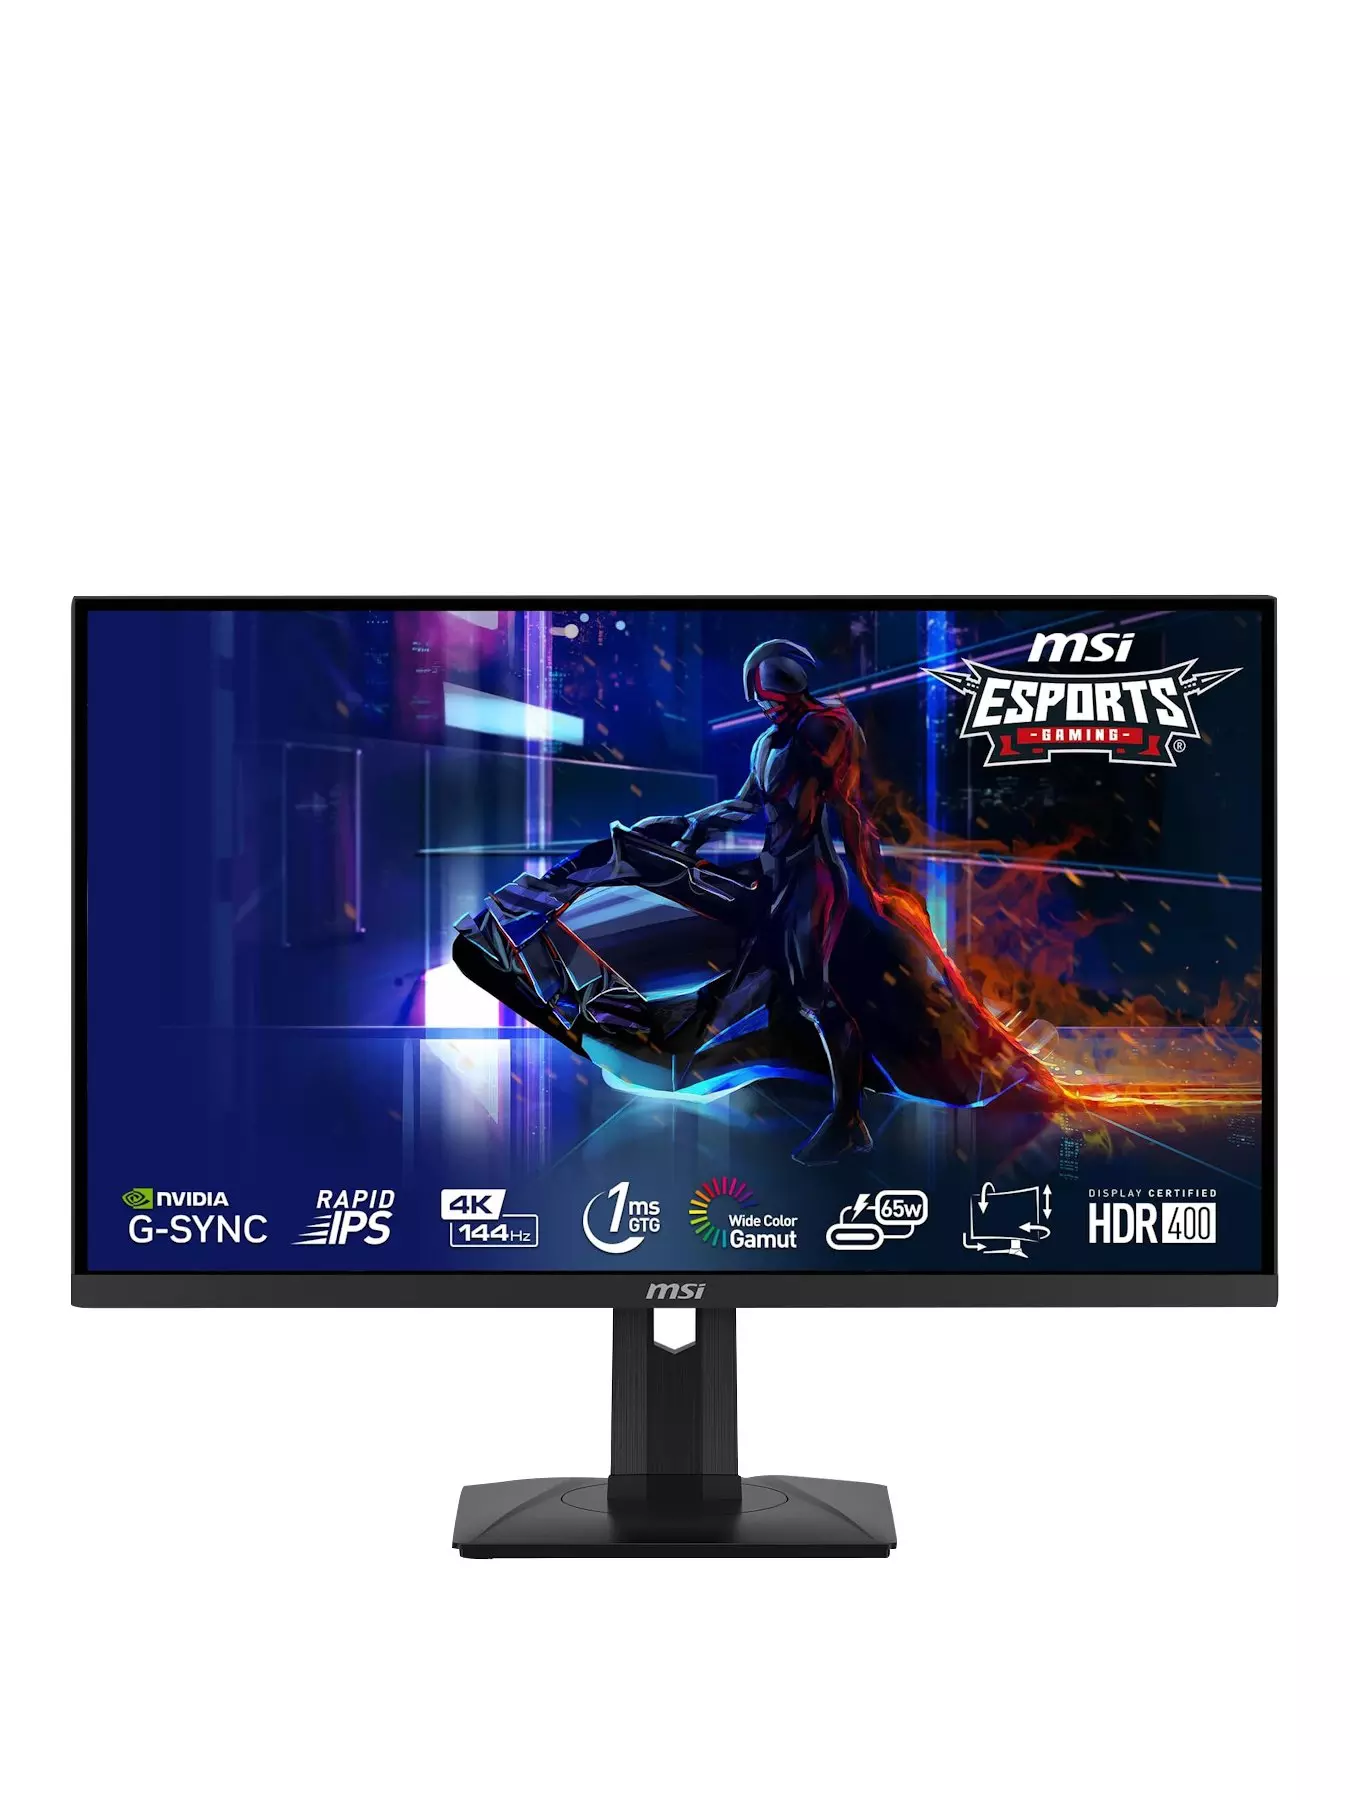 Grab this fast 27-inch 144Hz monitor with FreeSync support on sale for $275